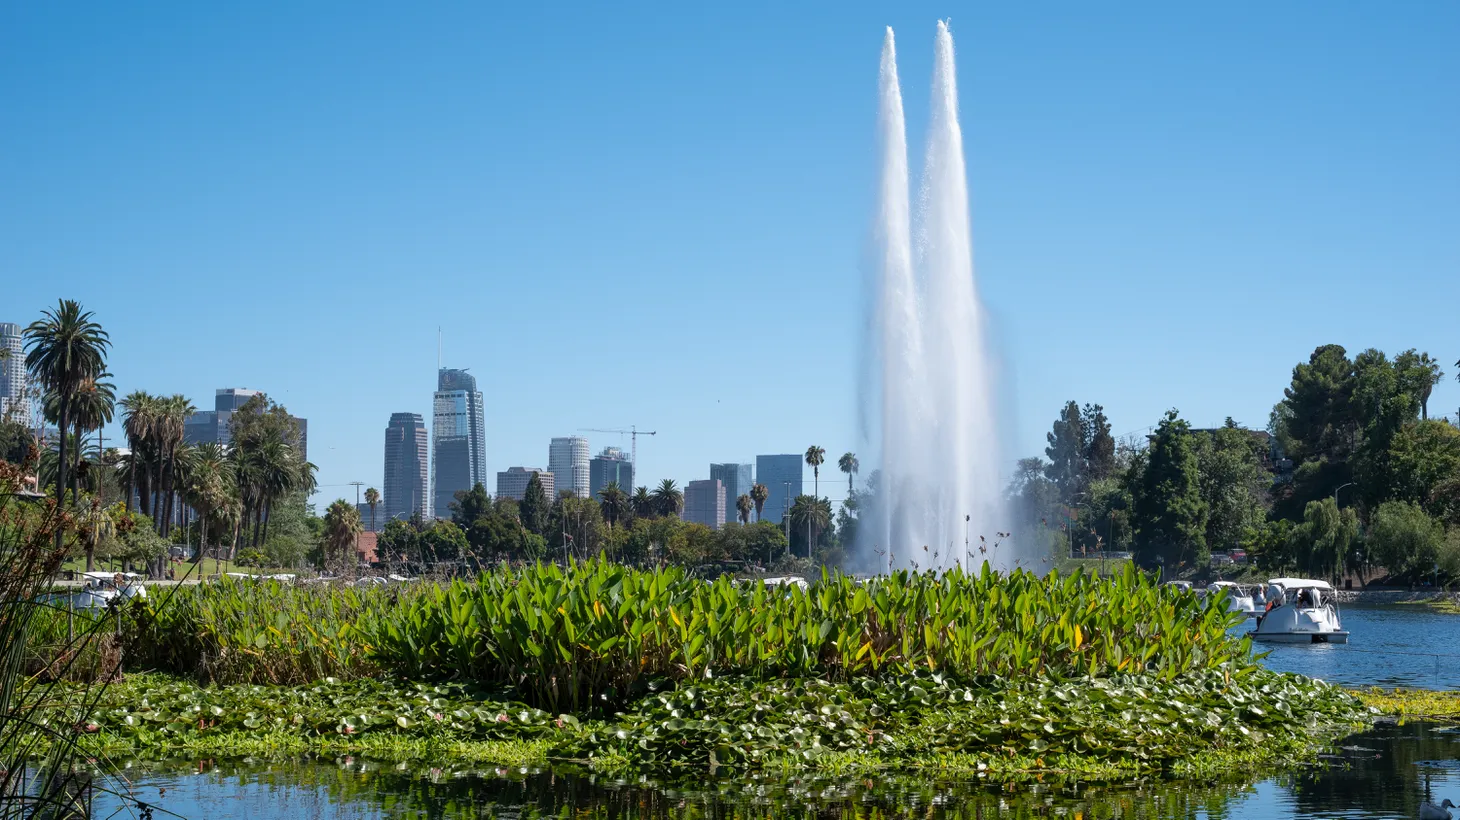 Downtown LA is seen in the backdrop against Echo Park Lake, which used to be filled with homeless encampments until they were cleared by LAPD two years ago.